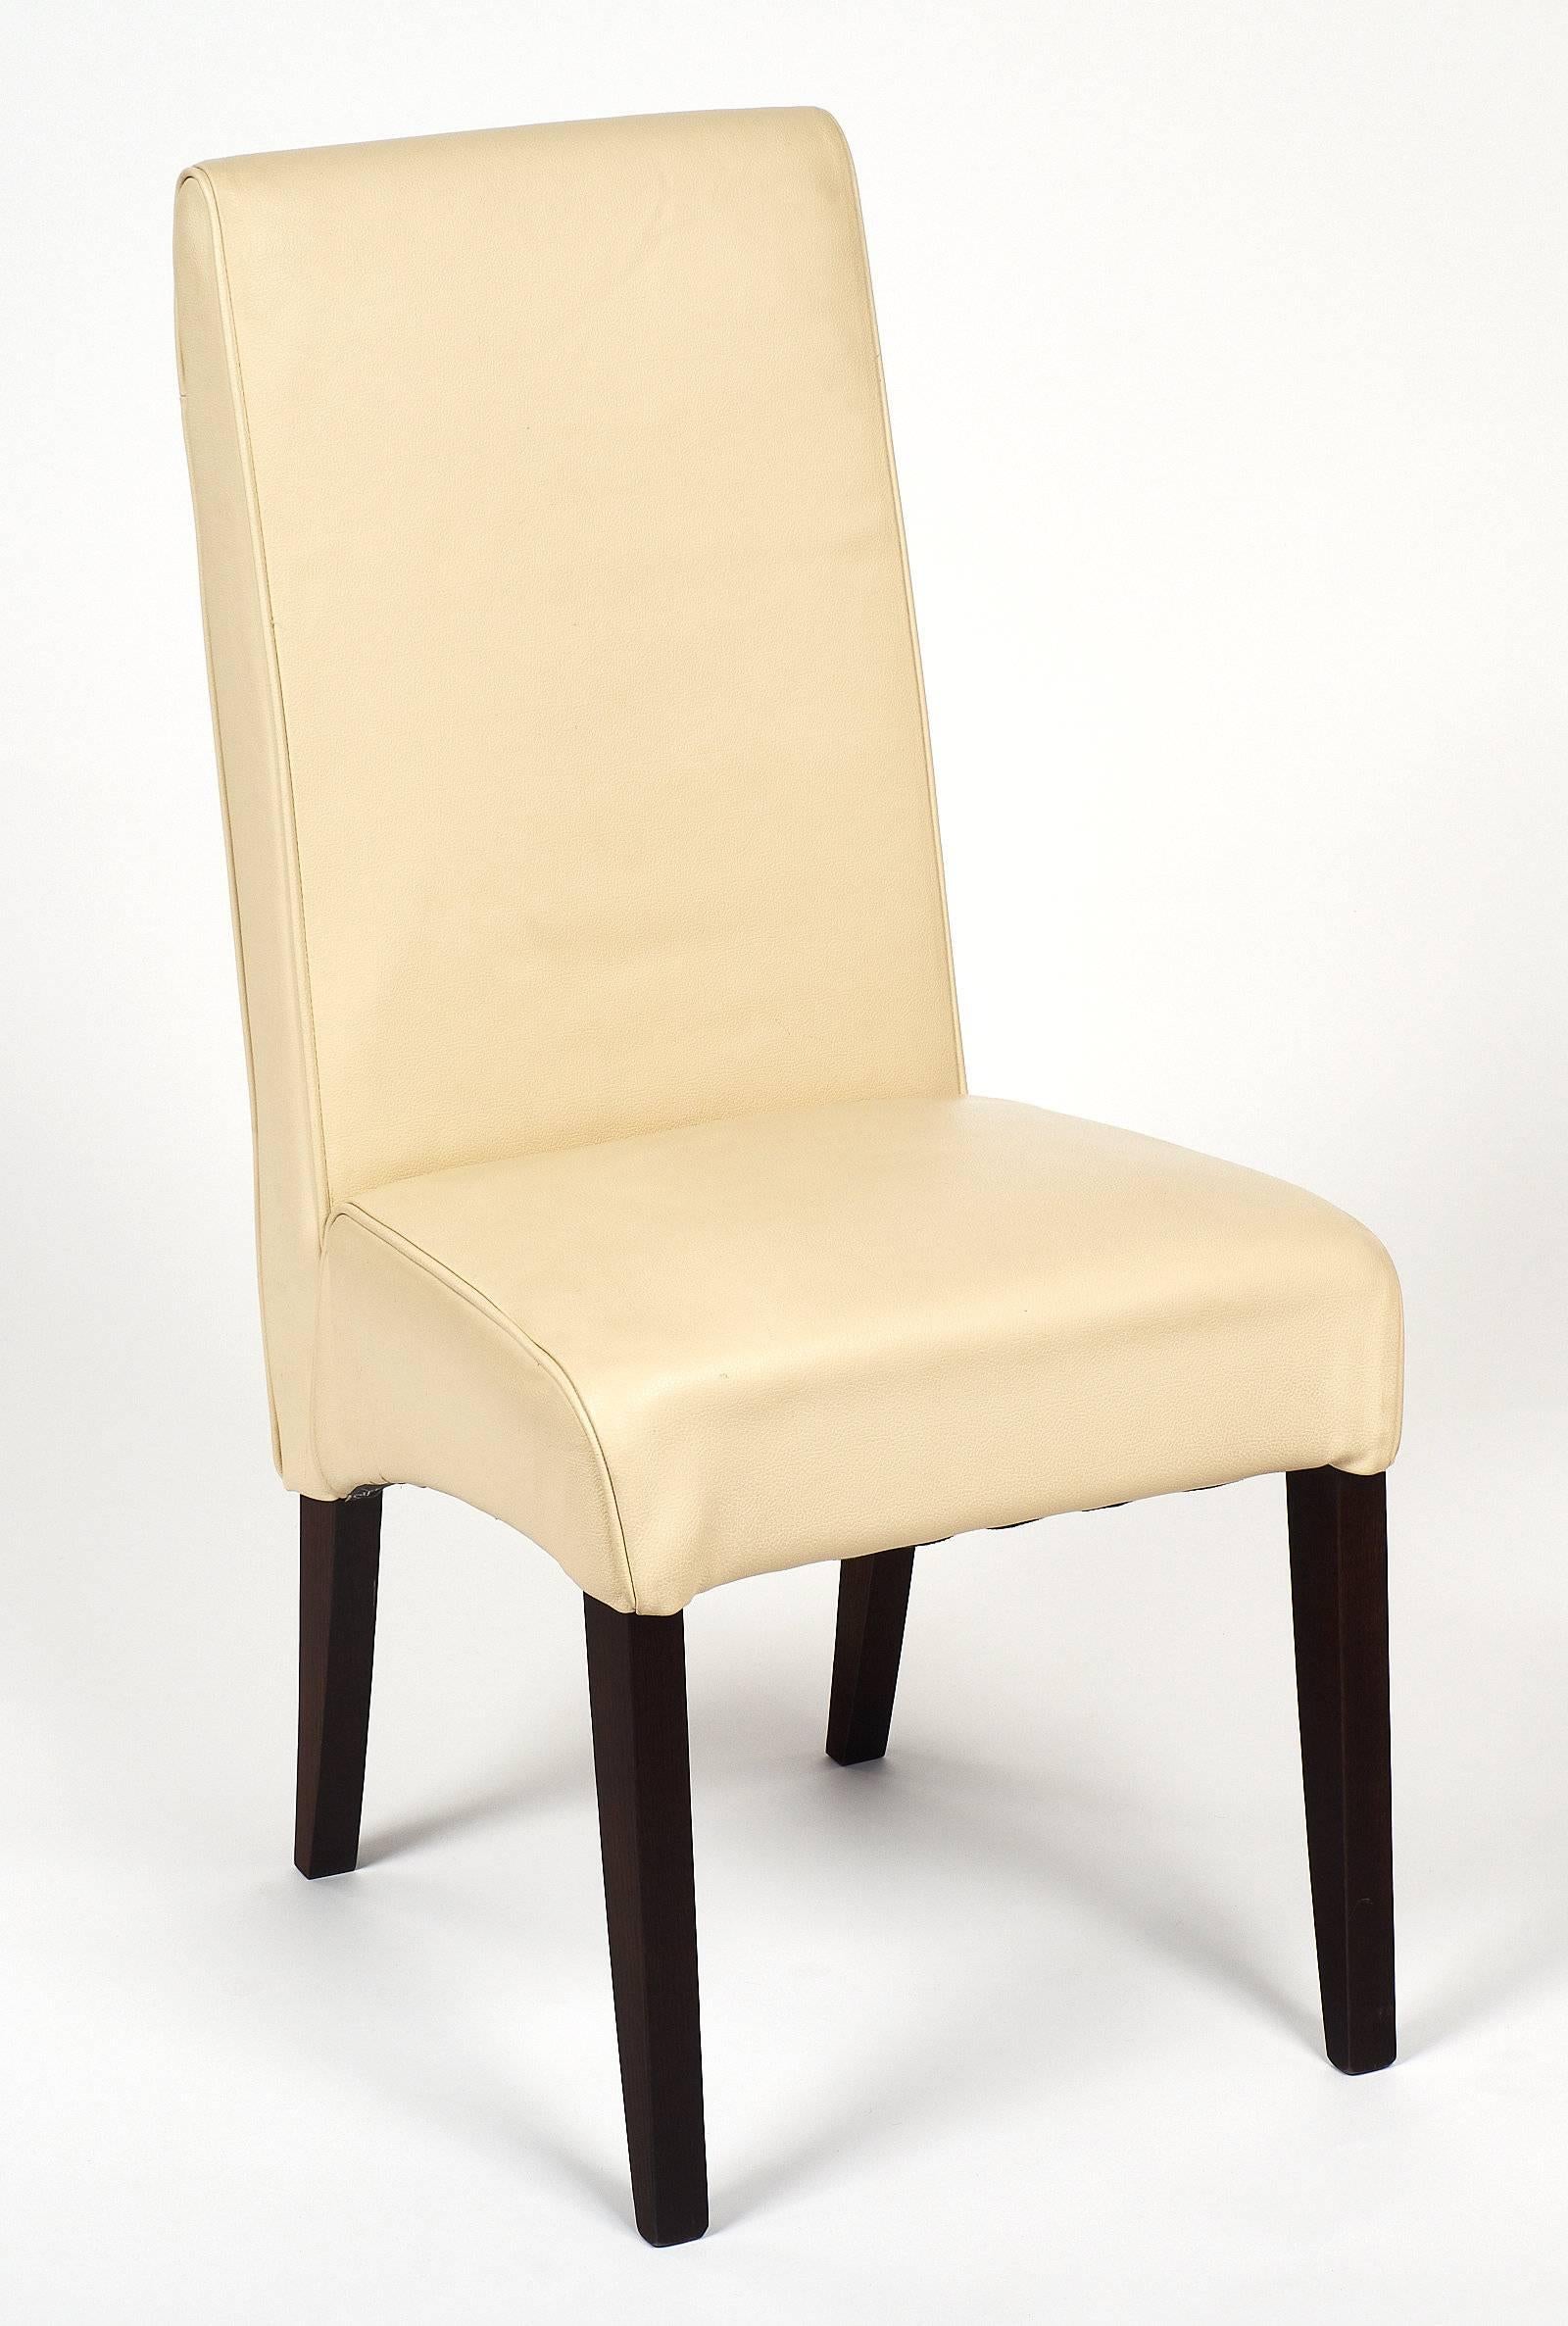 Comfortable set of Italian leather dining chairs covered in a rich, ivory colored leather. We love the tall backs and very strong craftsmanship.